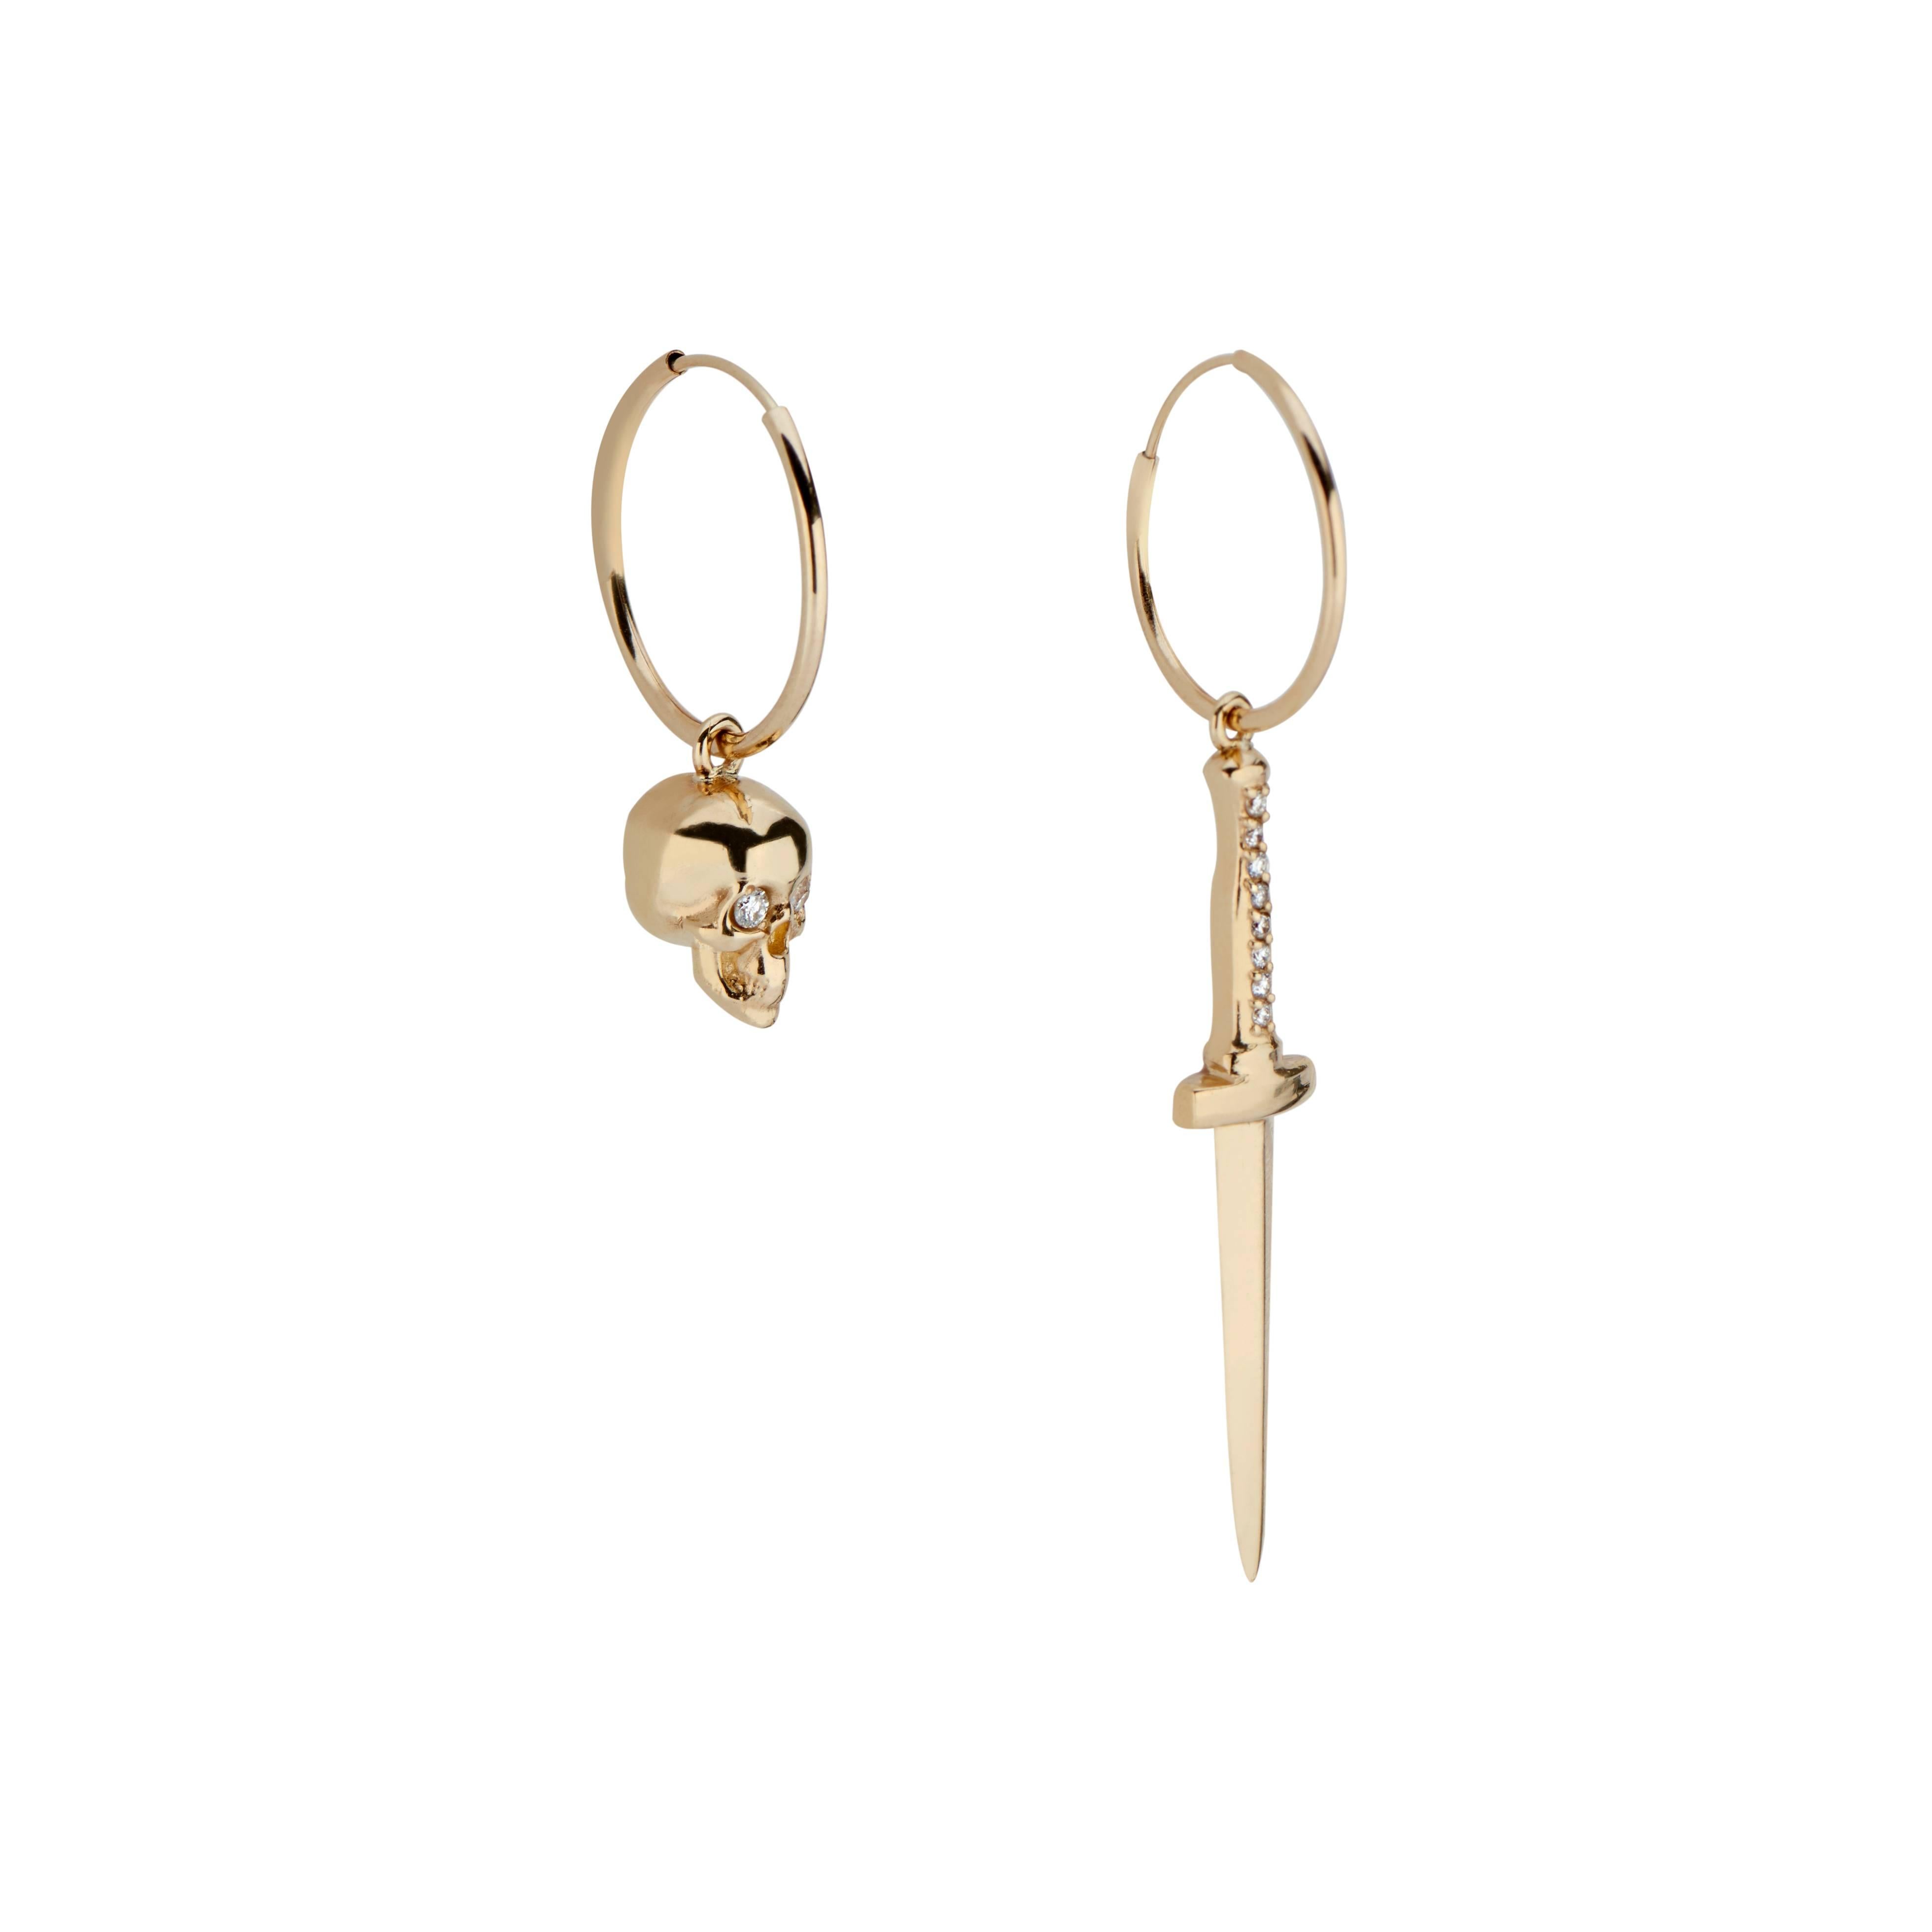 These 14k gold and diamond earrings combine one DRU. baby skull and one DRU. dagger for an edgy, yet sophisticated look.  Skulls represent mortality and the path that connects us all, and daggers have long symbolized bravery and courage.  Together,